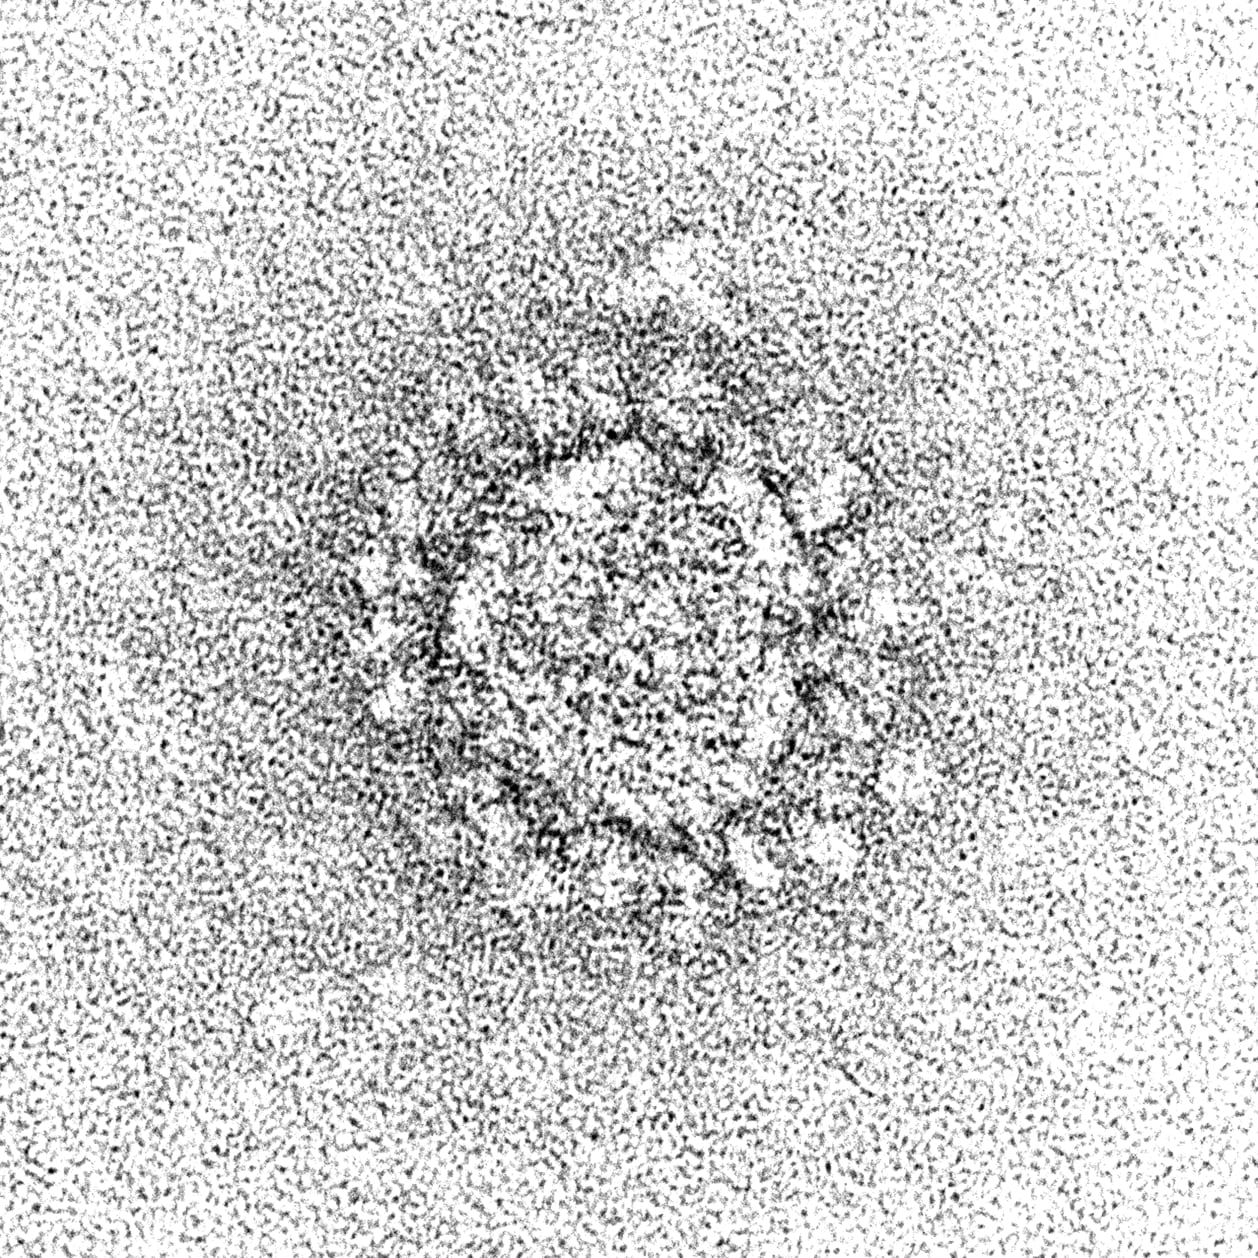 Negative stain electron microscopy identifying cause of 2003 SARS outbreak as a coronavirus